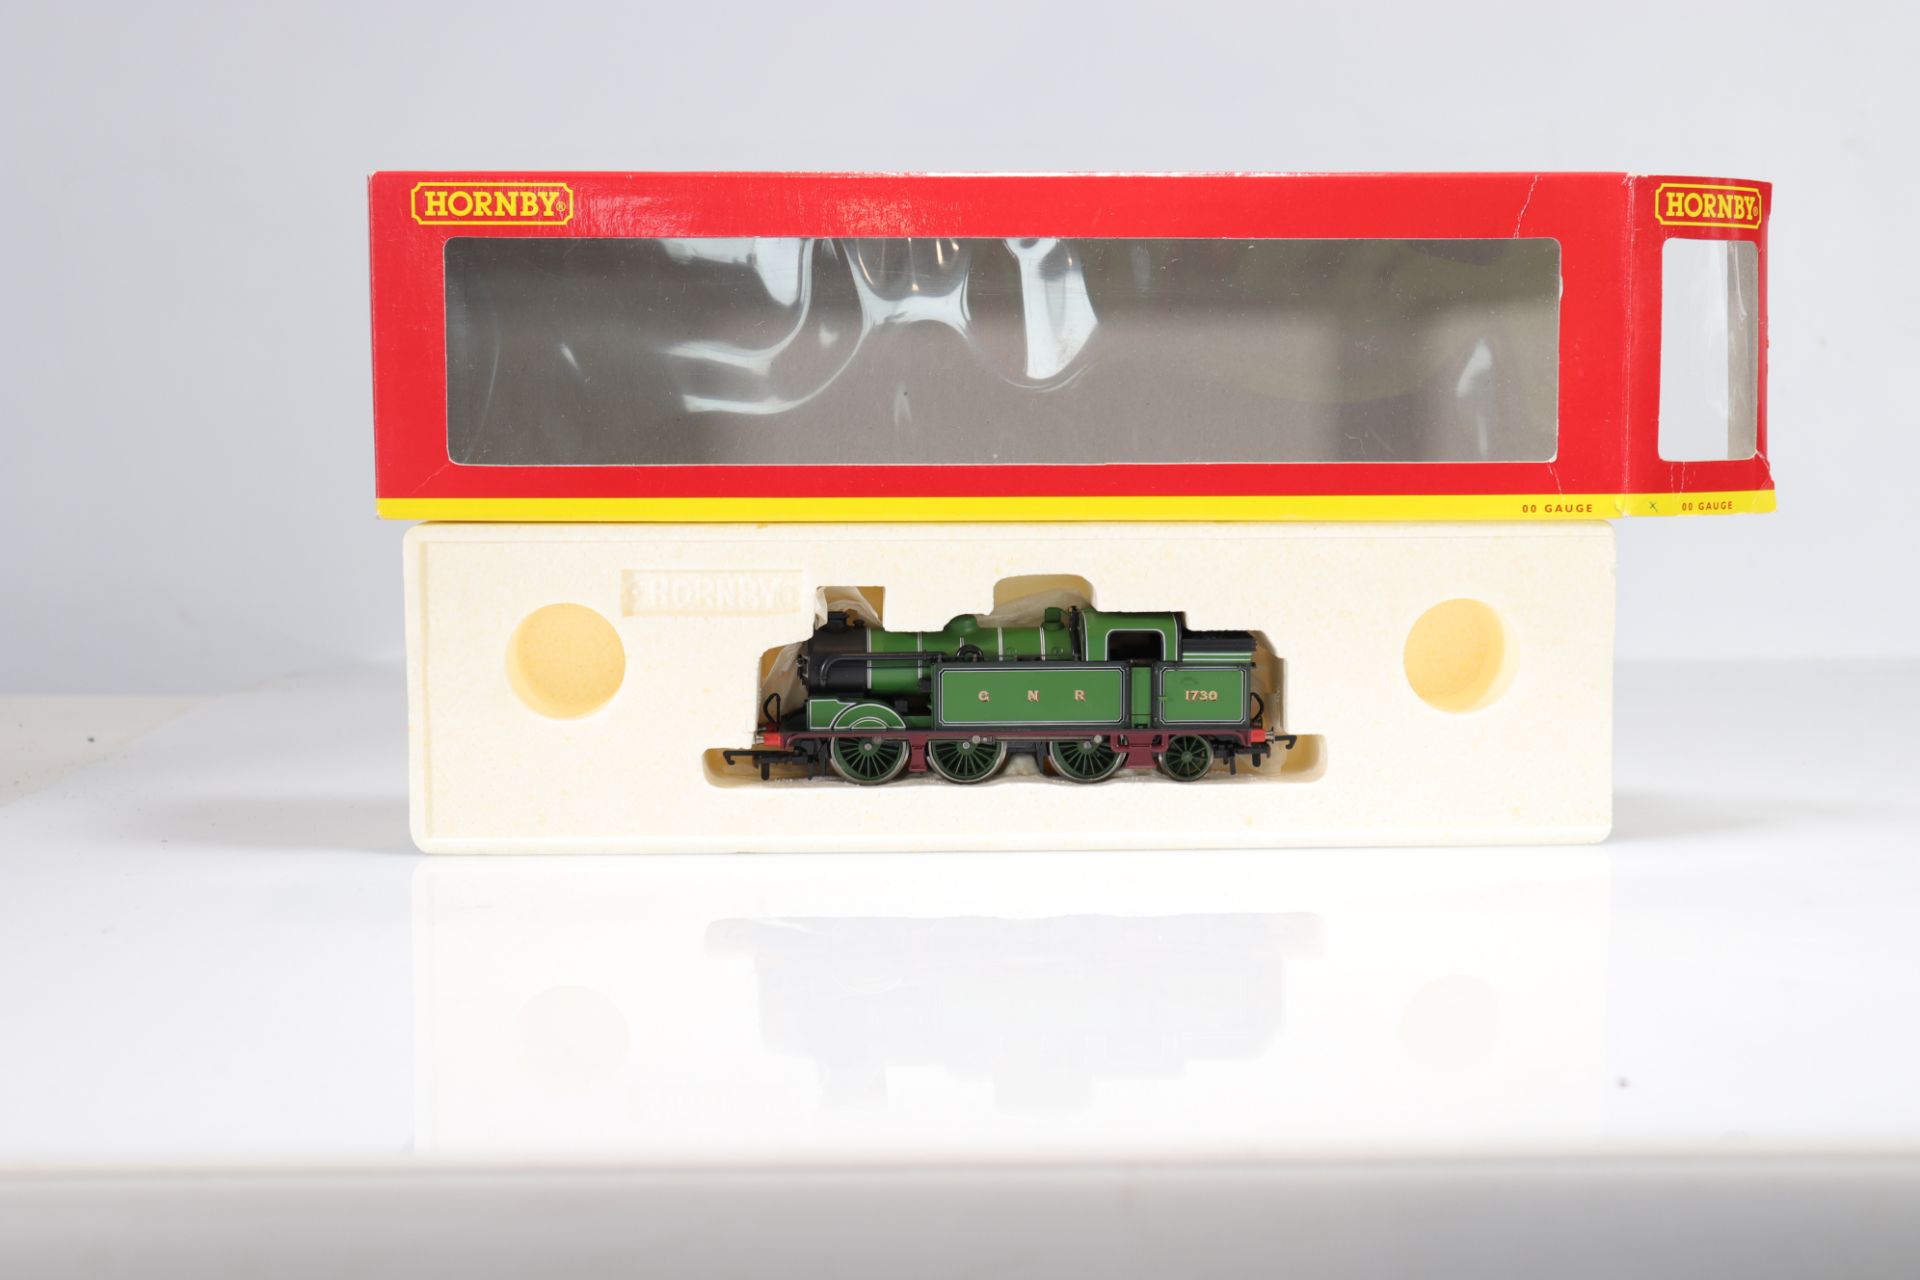 Hornby locomotive / Reference: R22114B / Type: 1730 0.6.2.T